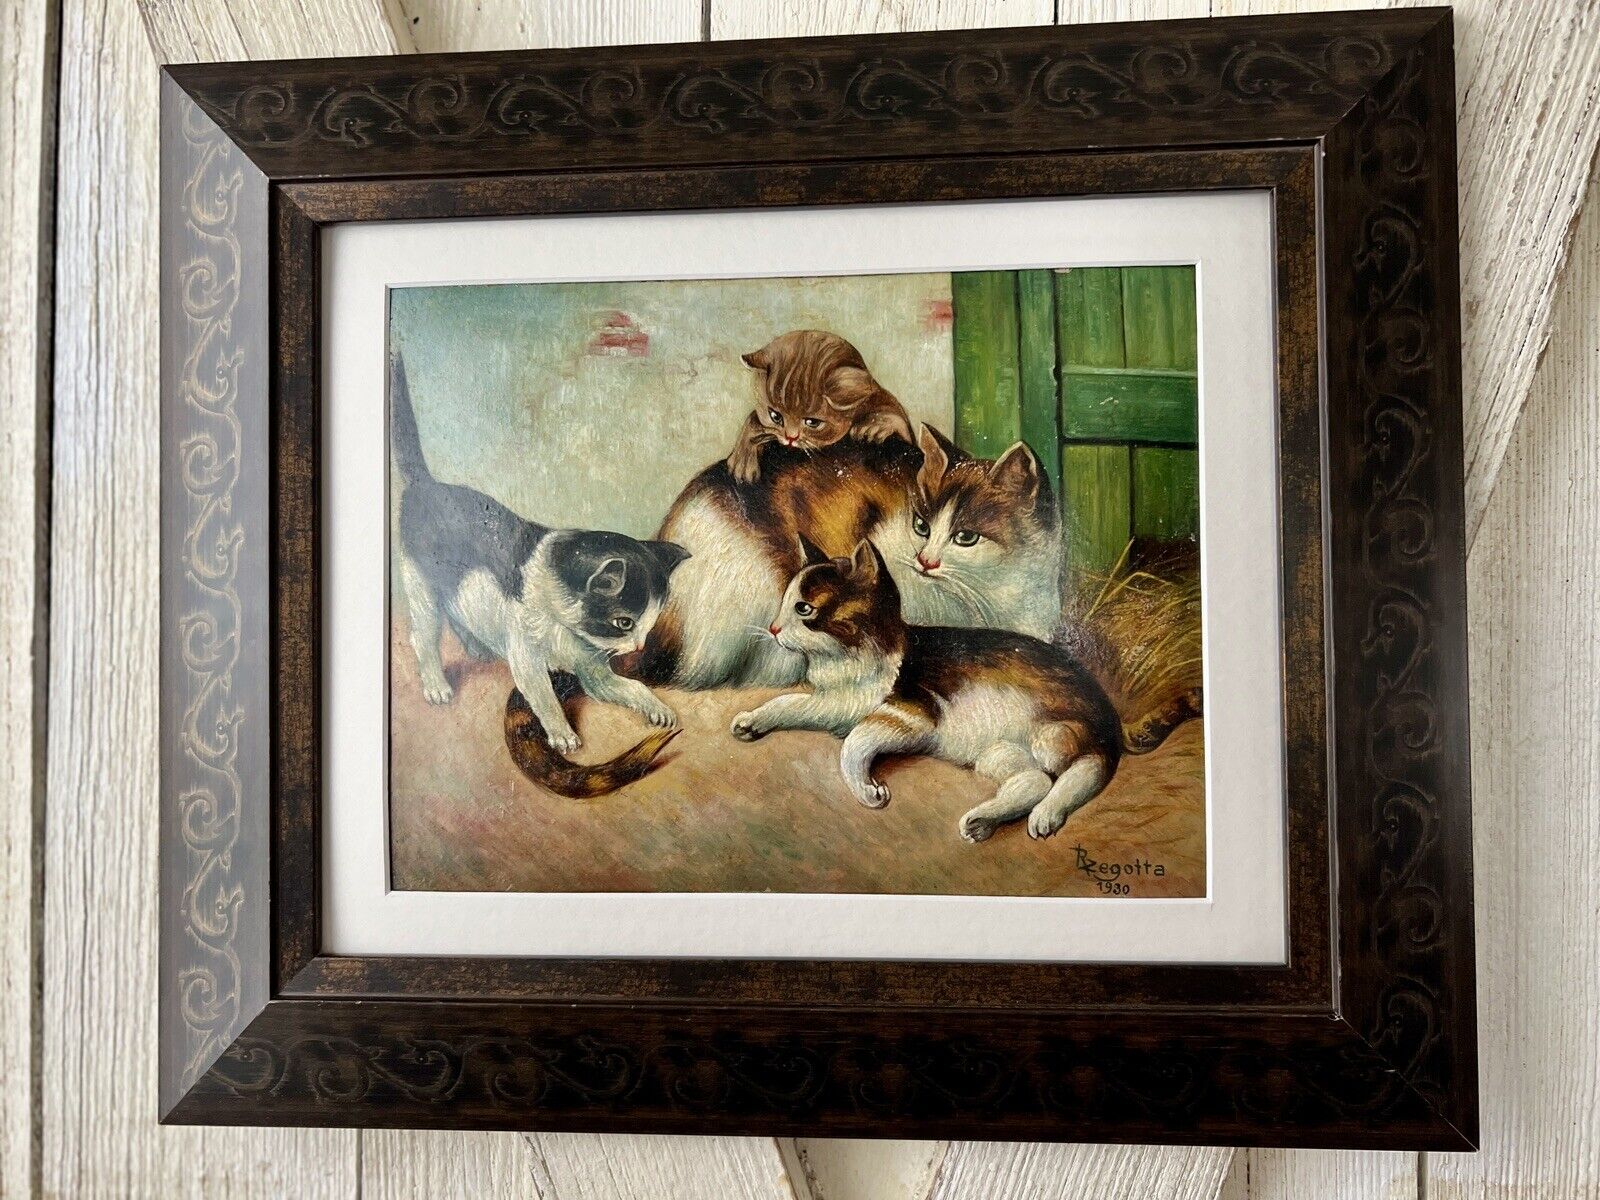 Antique Mother Cat W/ Kittens Oil Painting on Board 1930. Framed To 18”x11.5”